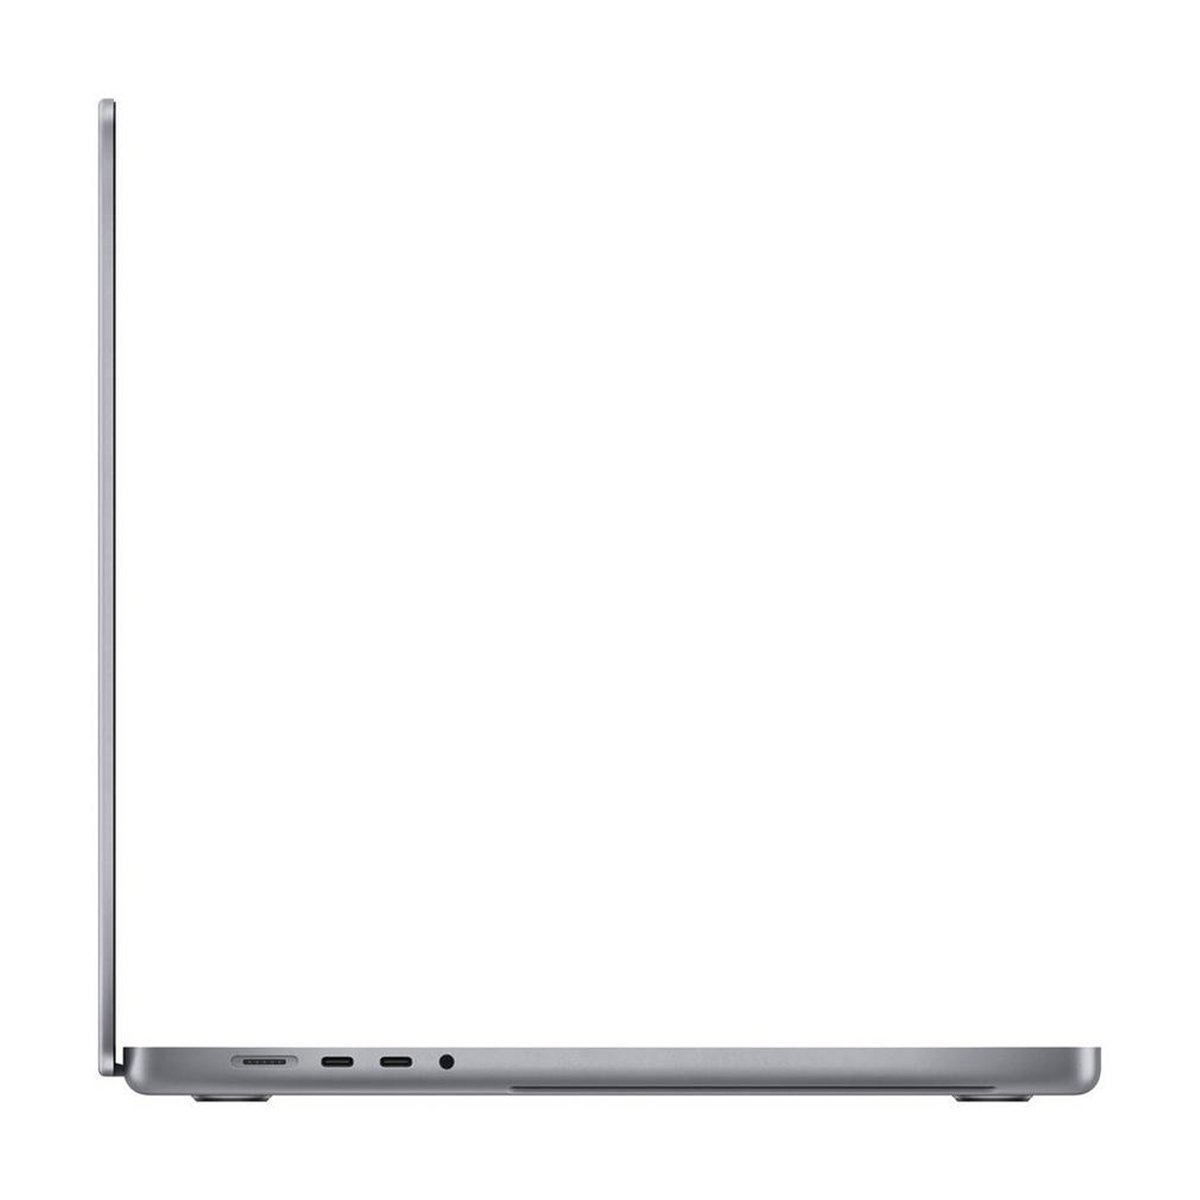 Apple 16-inch MacBook Pro: Apple M1 Pro chip with 10‑core CPU and 16‑core GPU, 512GB SSD - Space Grey English Keyboard